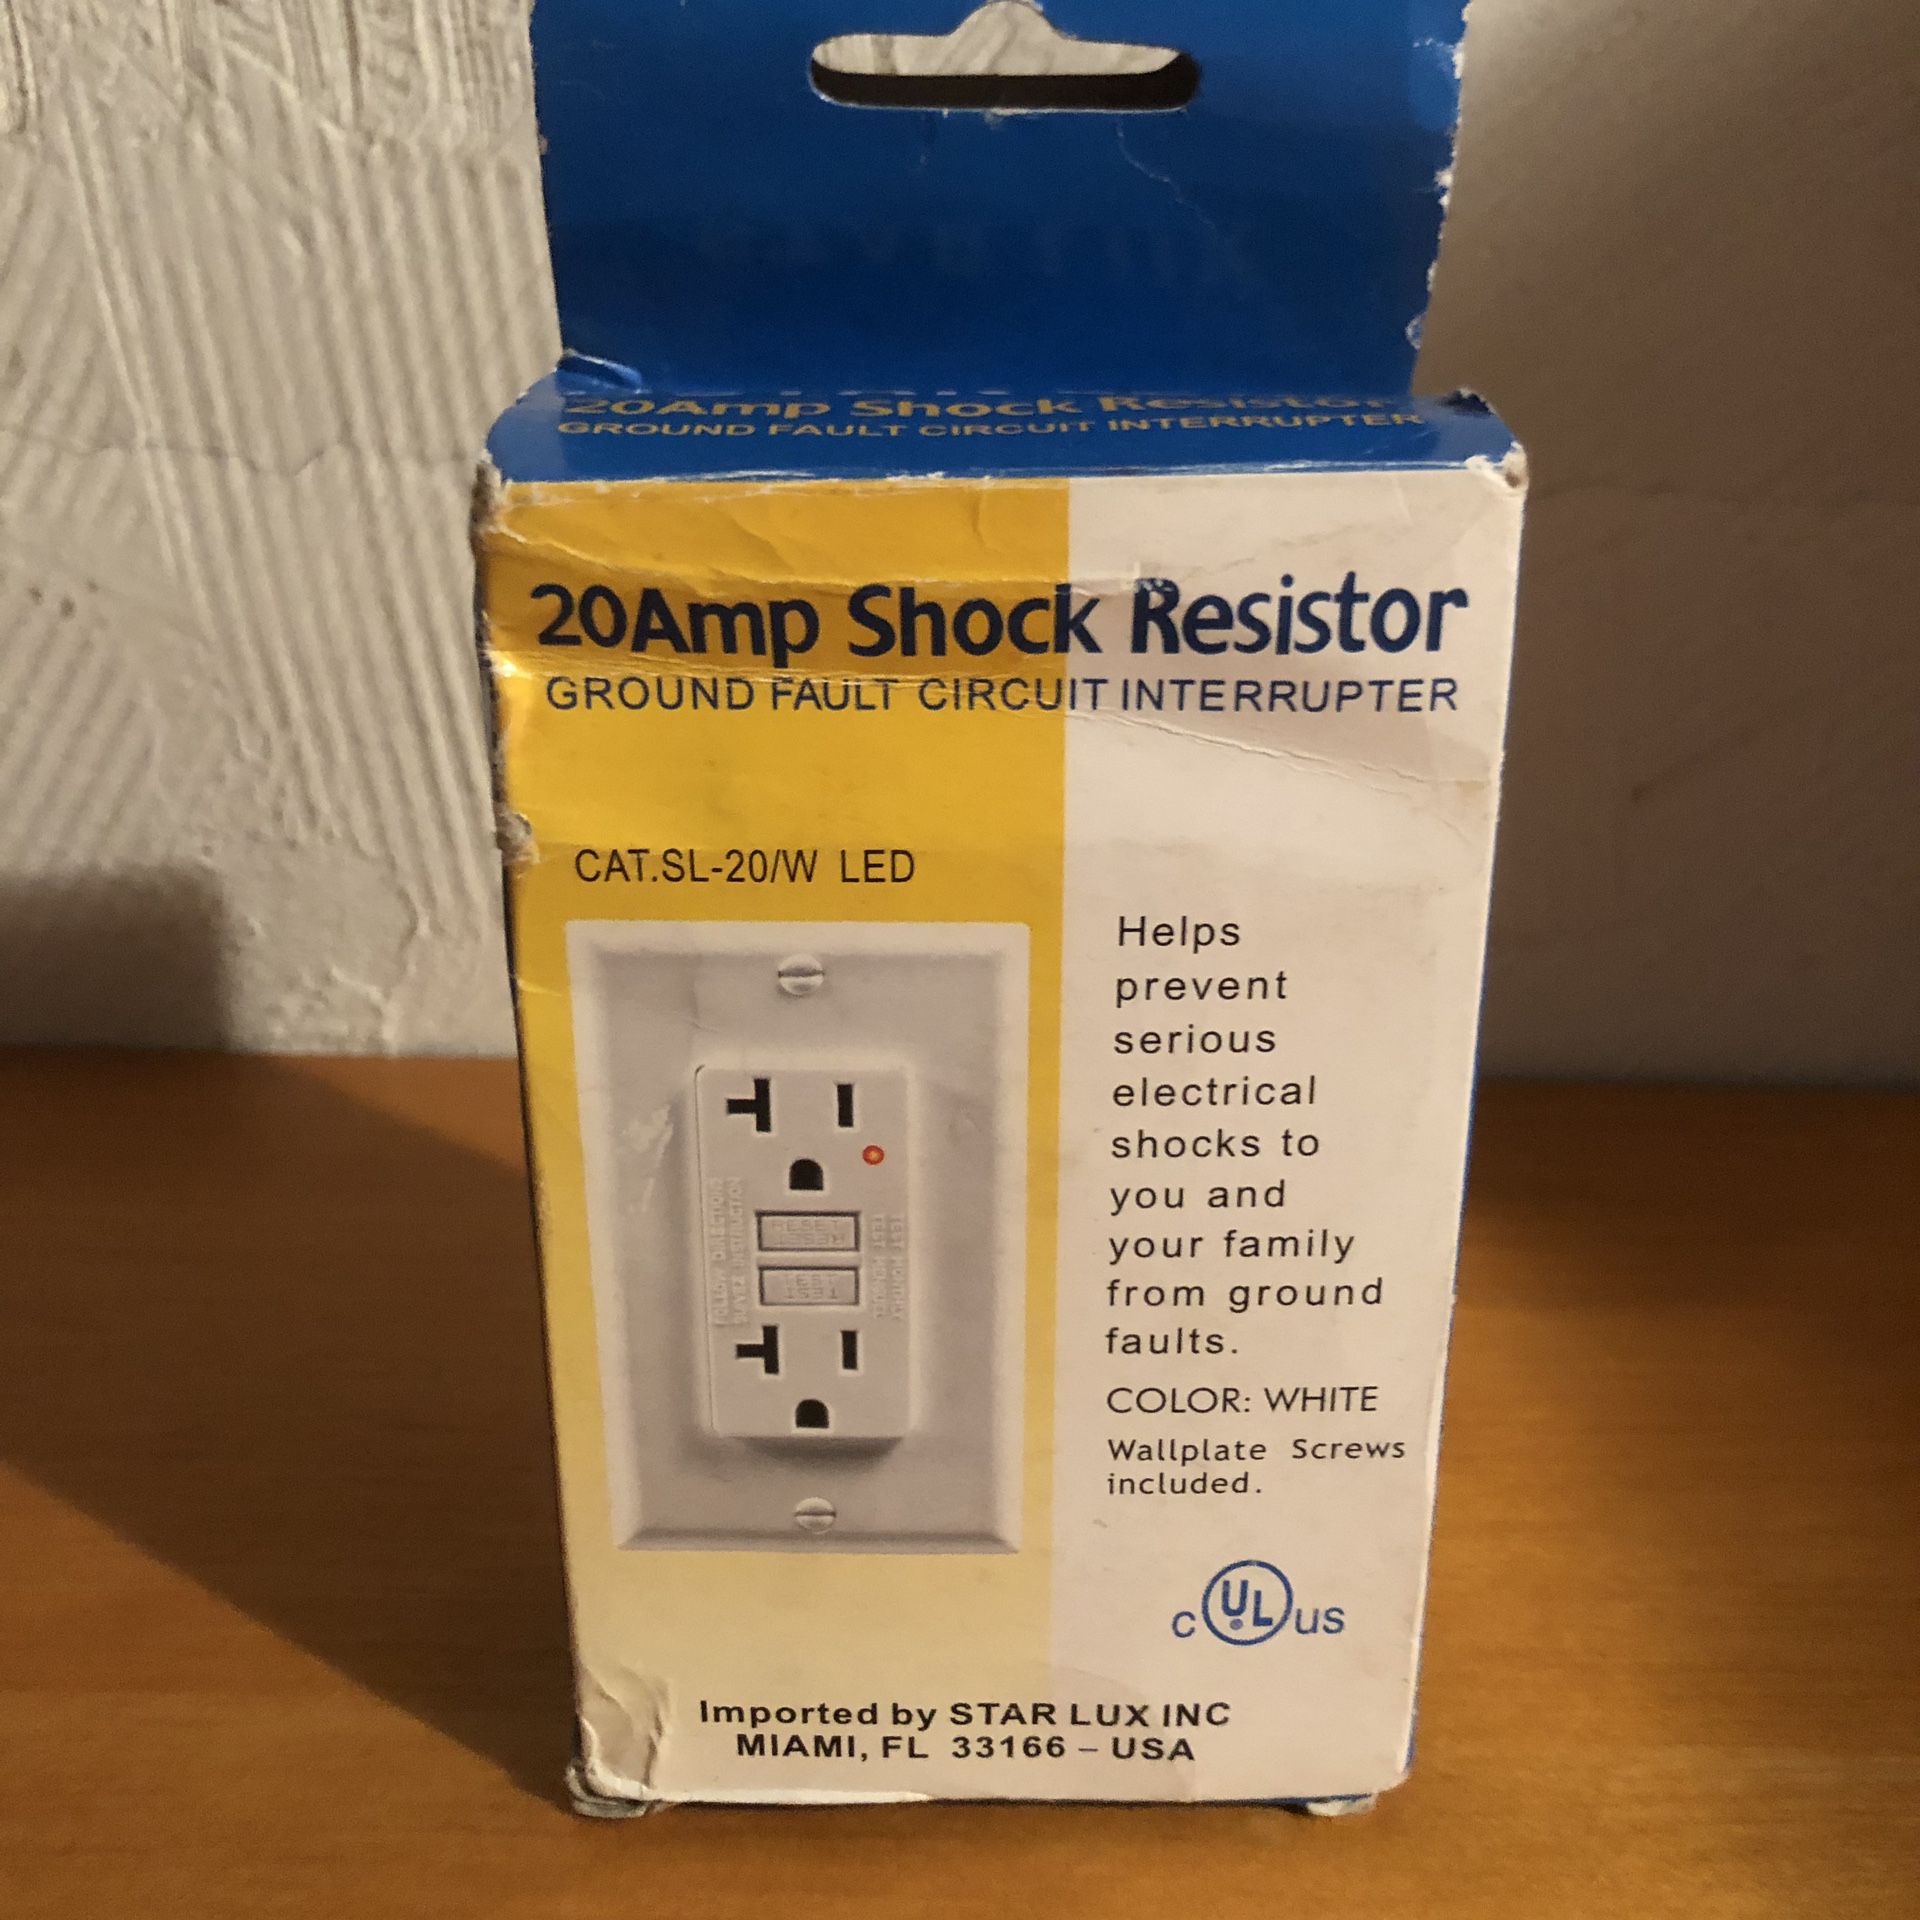 New in box 20 amp shock resistor ground fault circuit interrupter that helps prevent electrical shocks. The box is a little beat up but the equipment